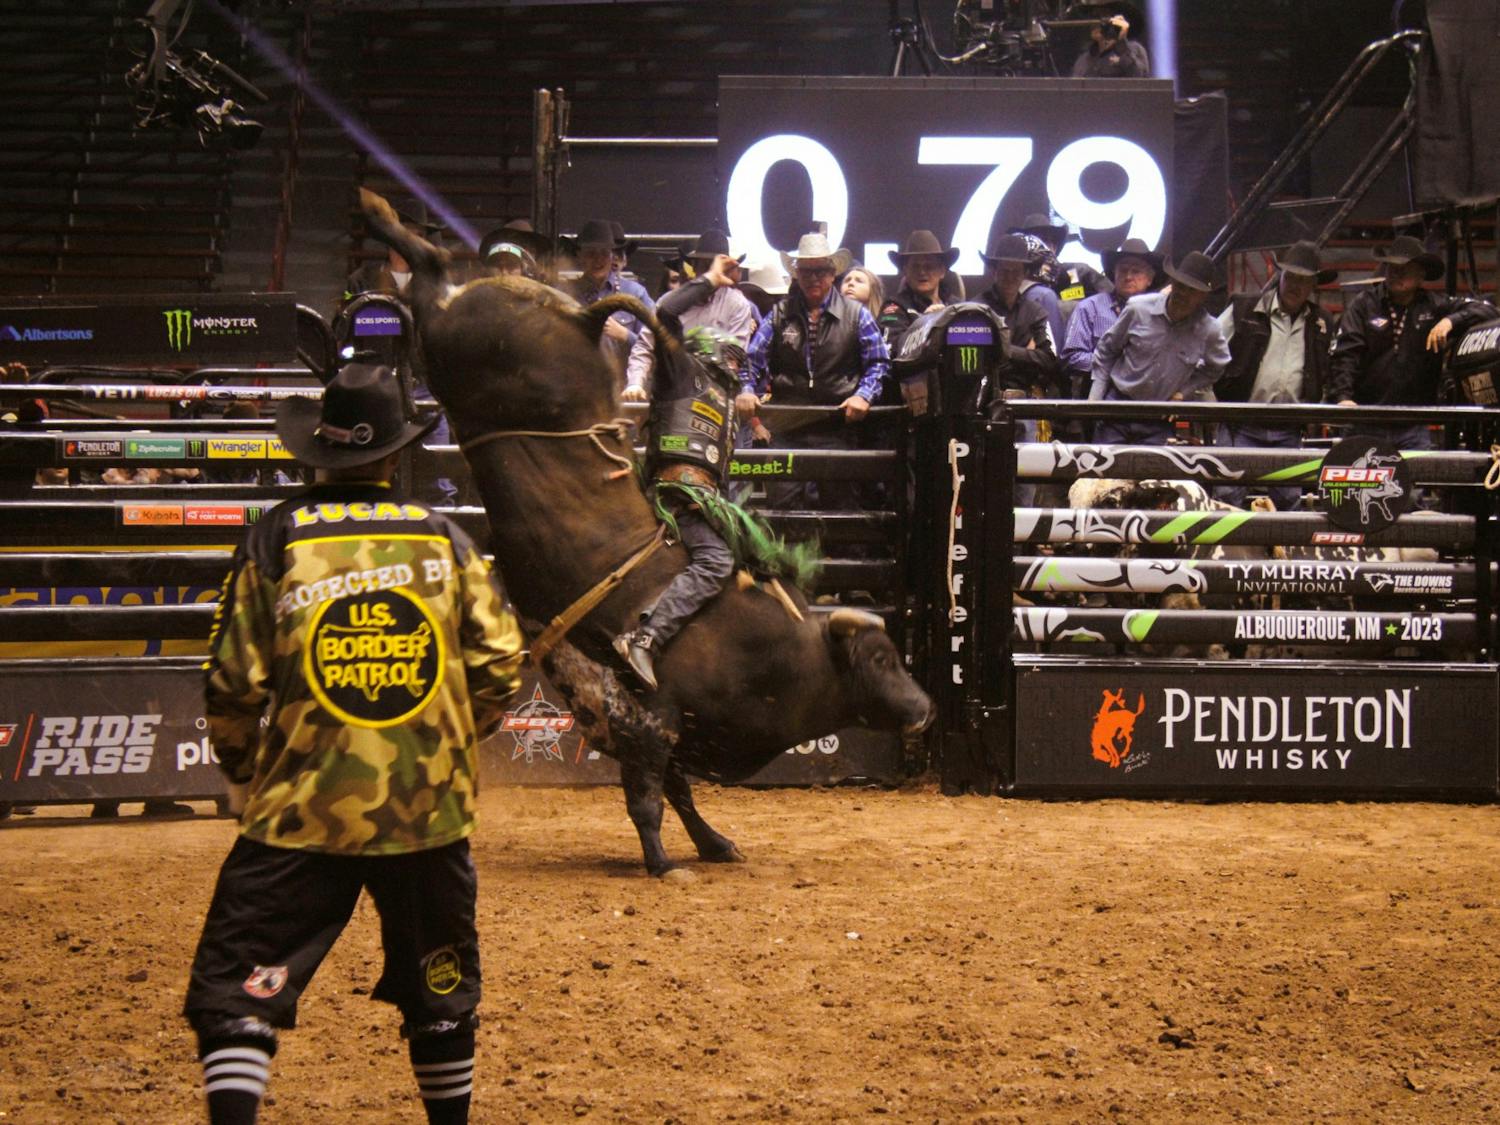 GALLERY: Bull riding stampedes into The Pit